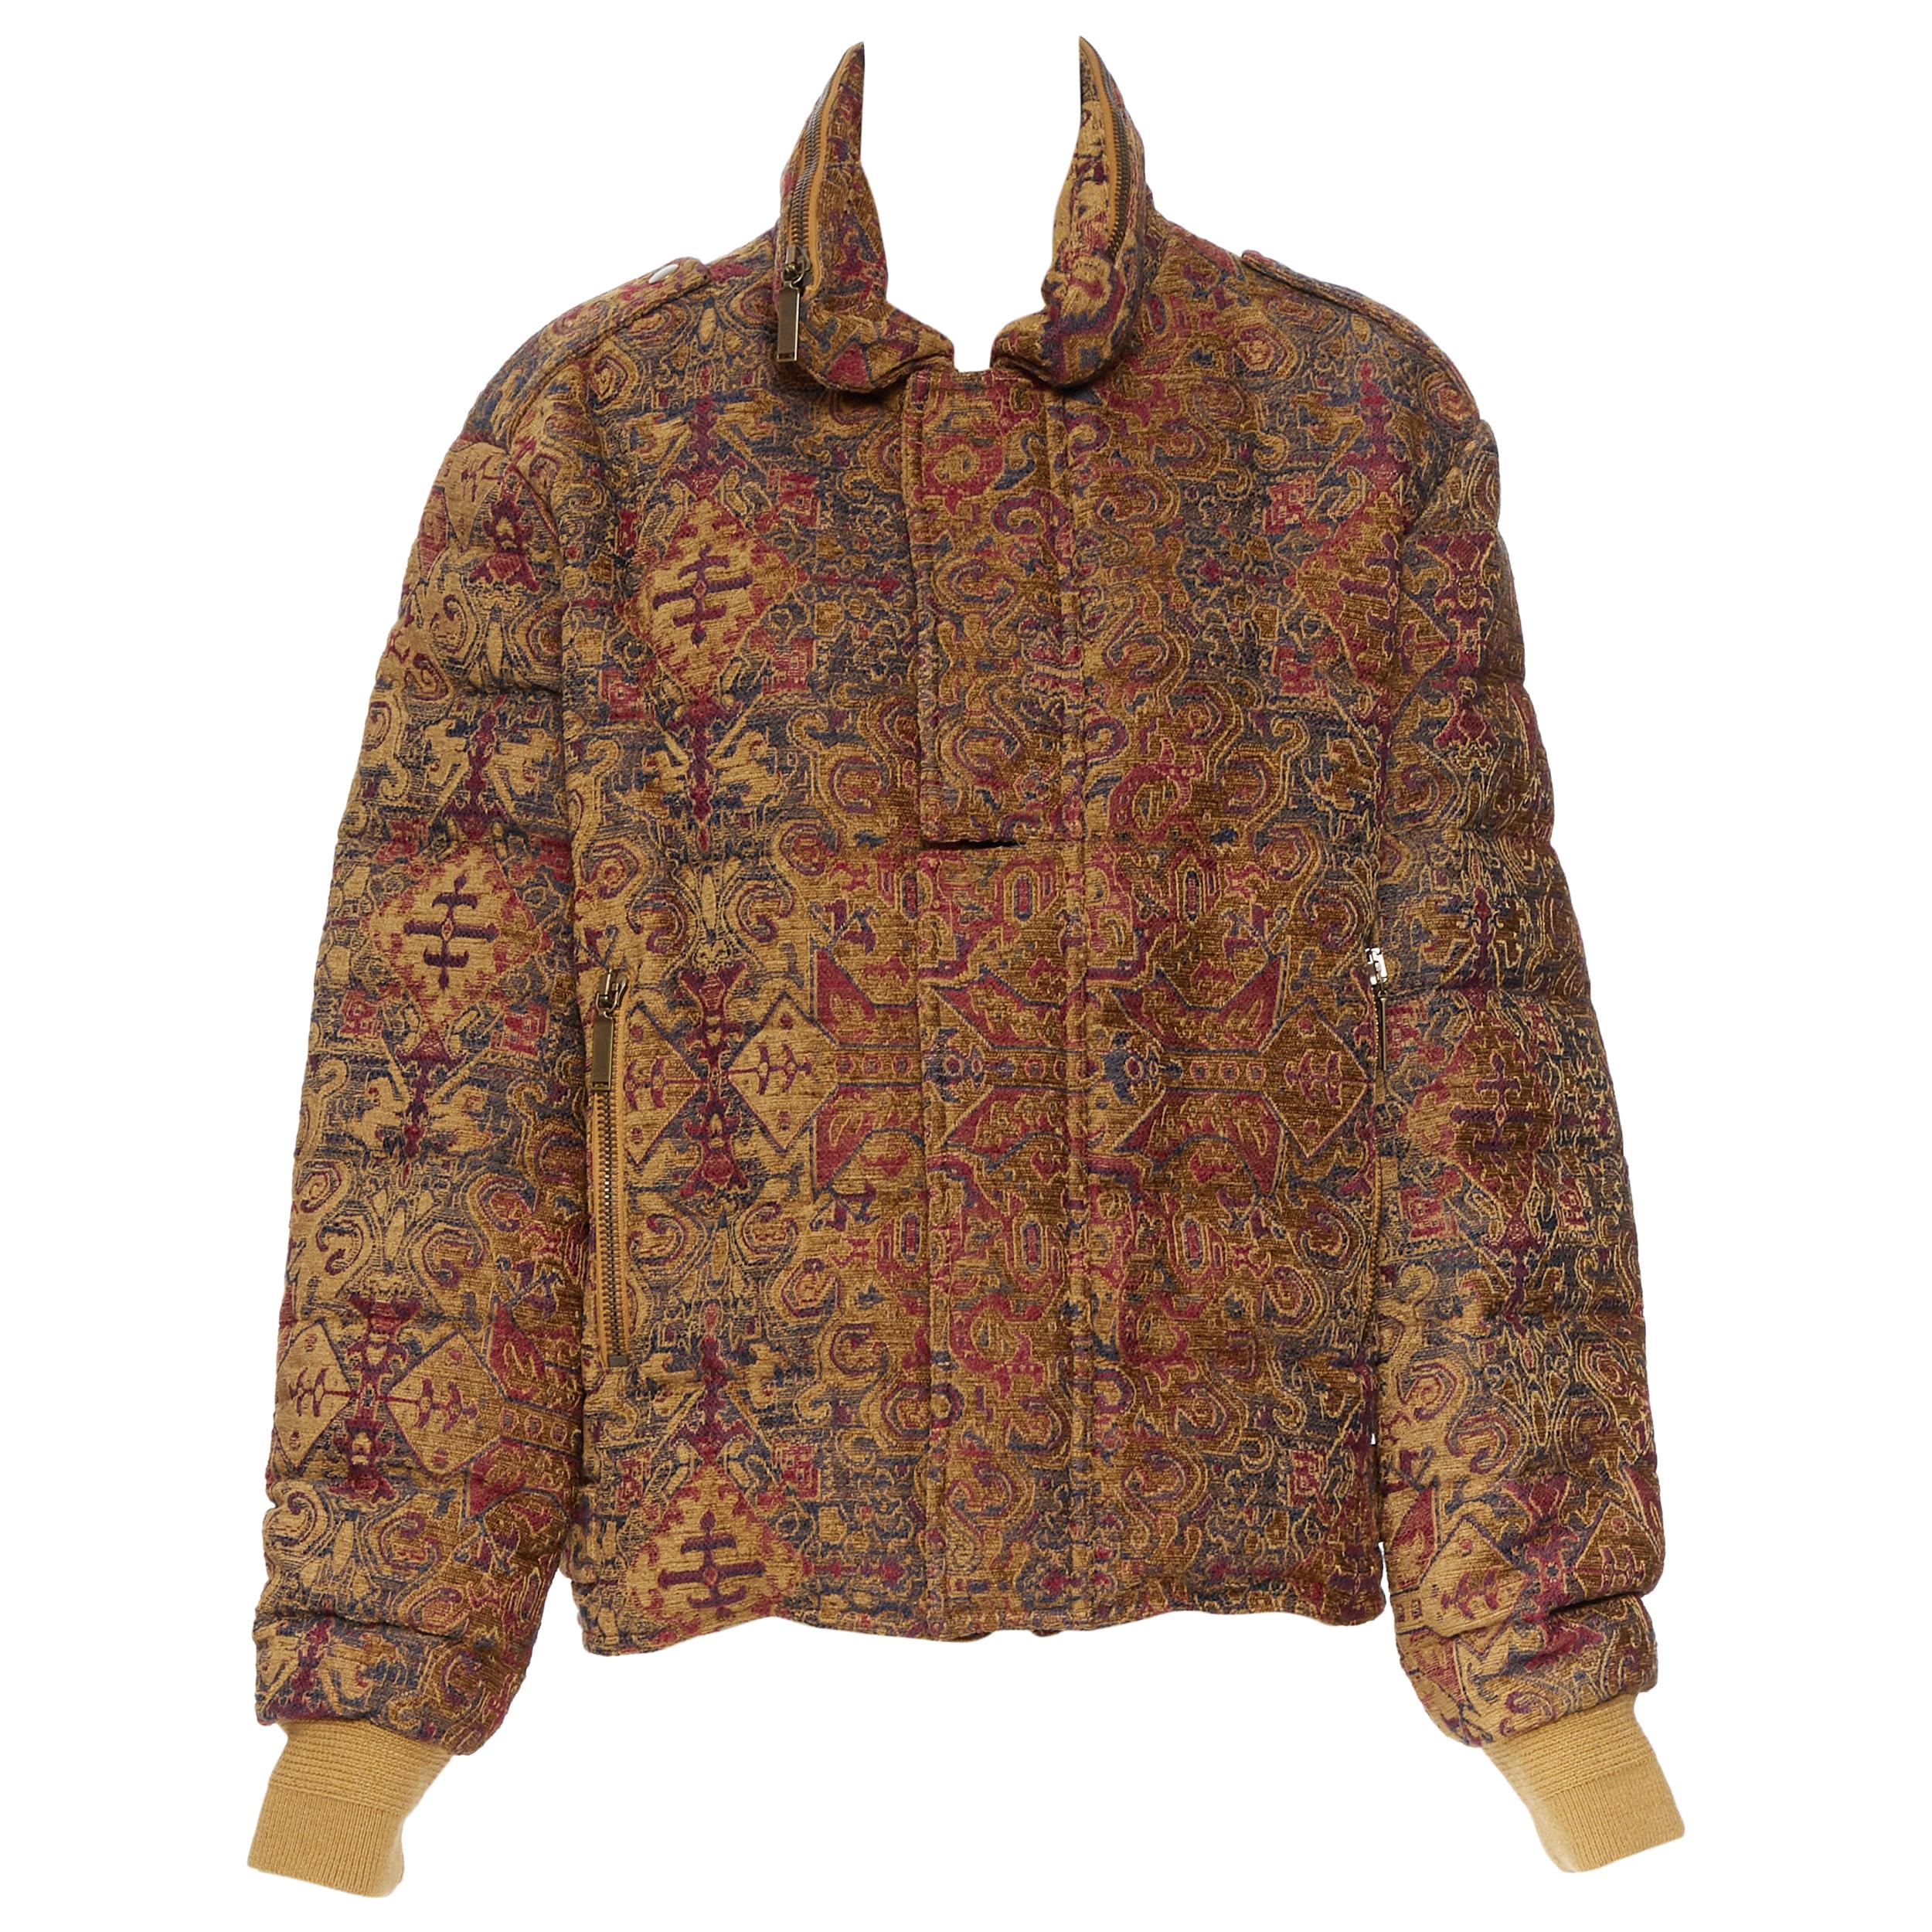 Tapestry Jackets - 5 For Sale on 1stDibs